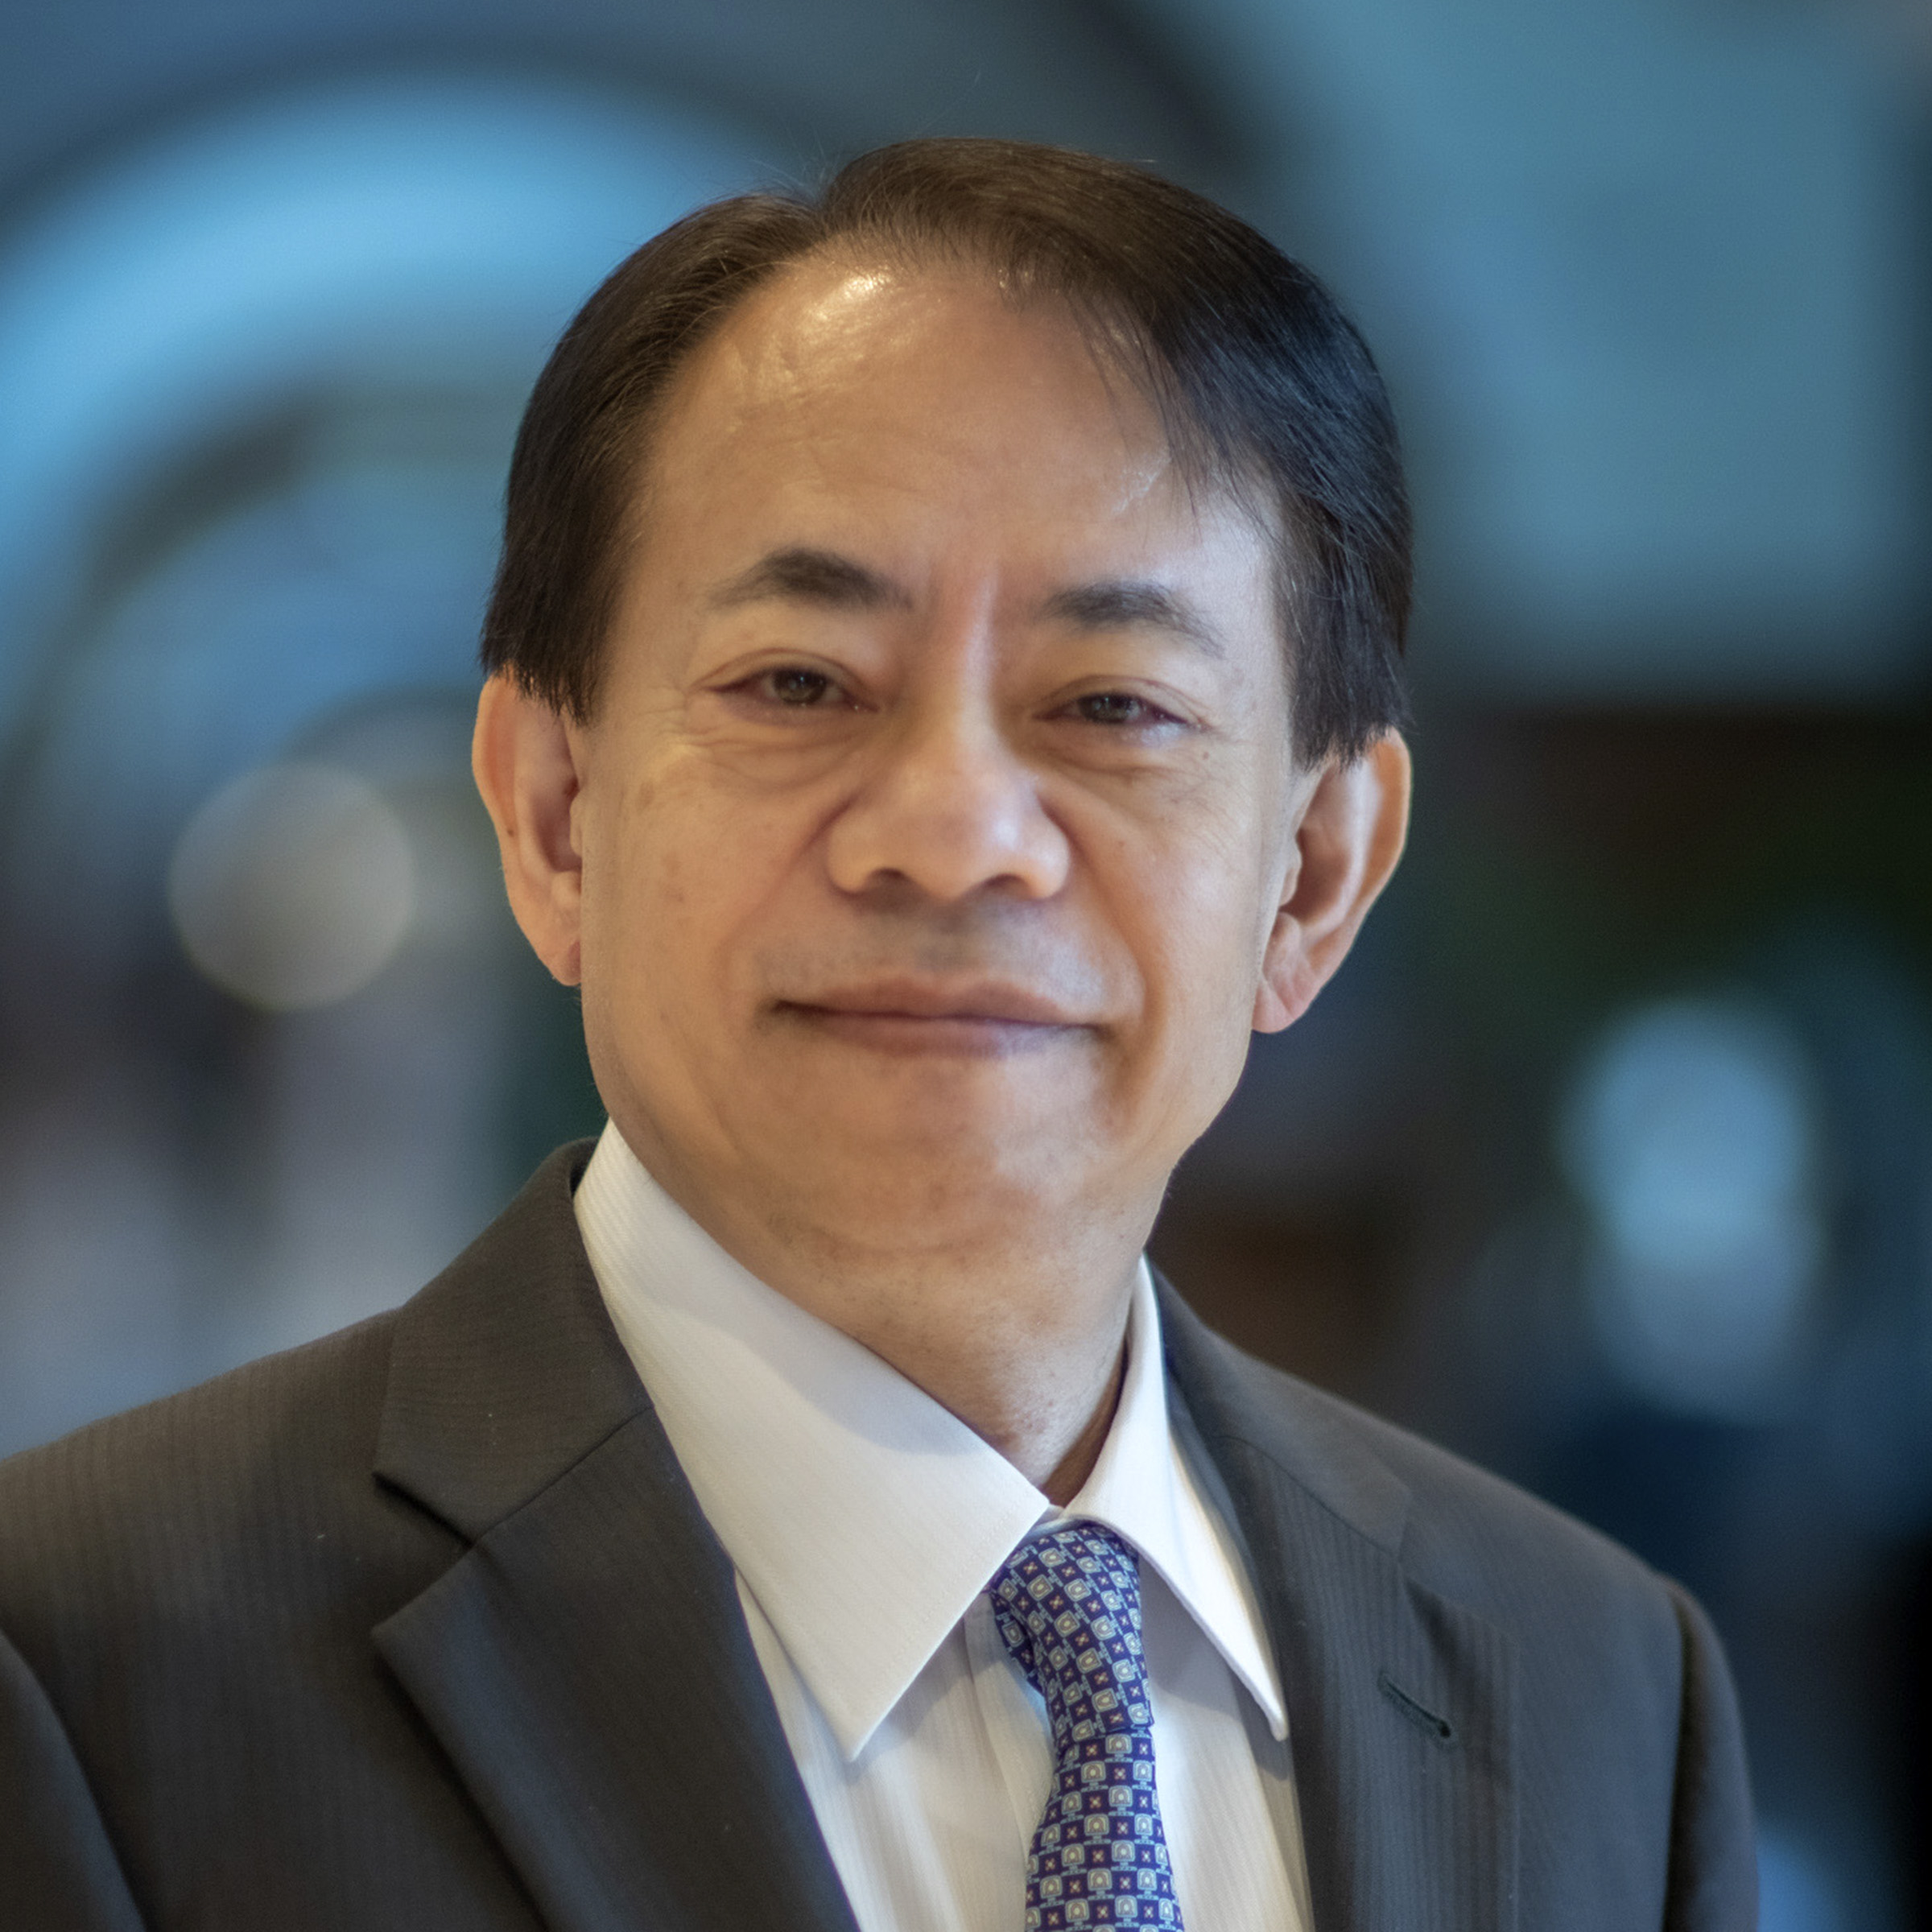 Masatsugu Asakawa is the President of the Asian Development Bank (ADB) and the Chairperson of ADB’s Board of Directors. He was elected President by ADB’s Board of Governors and assumed office on 17 January 2020.